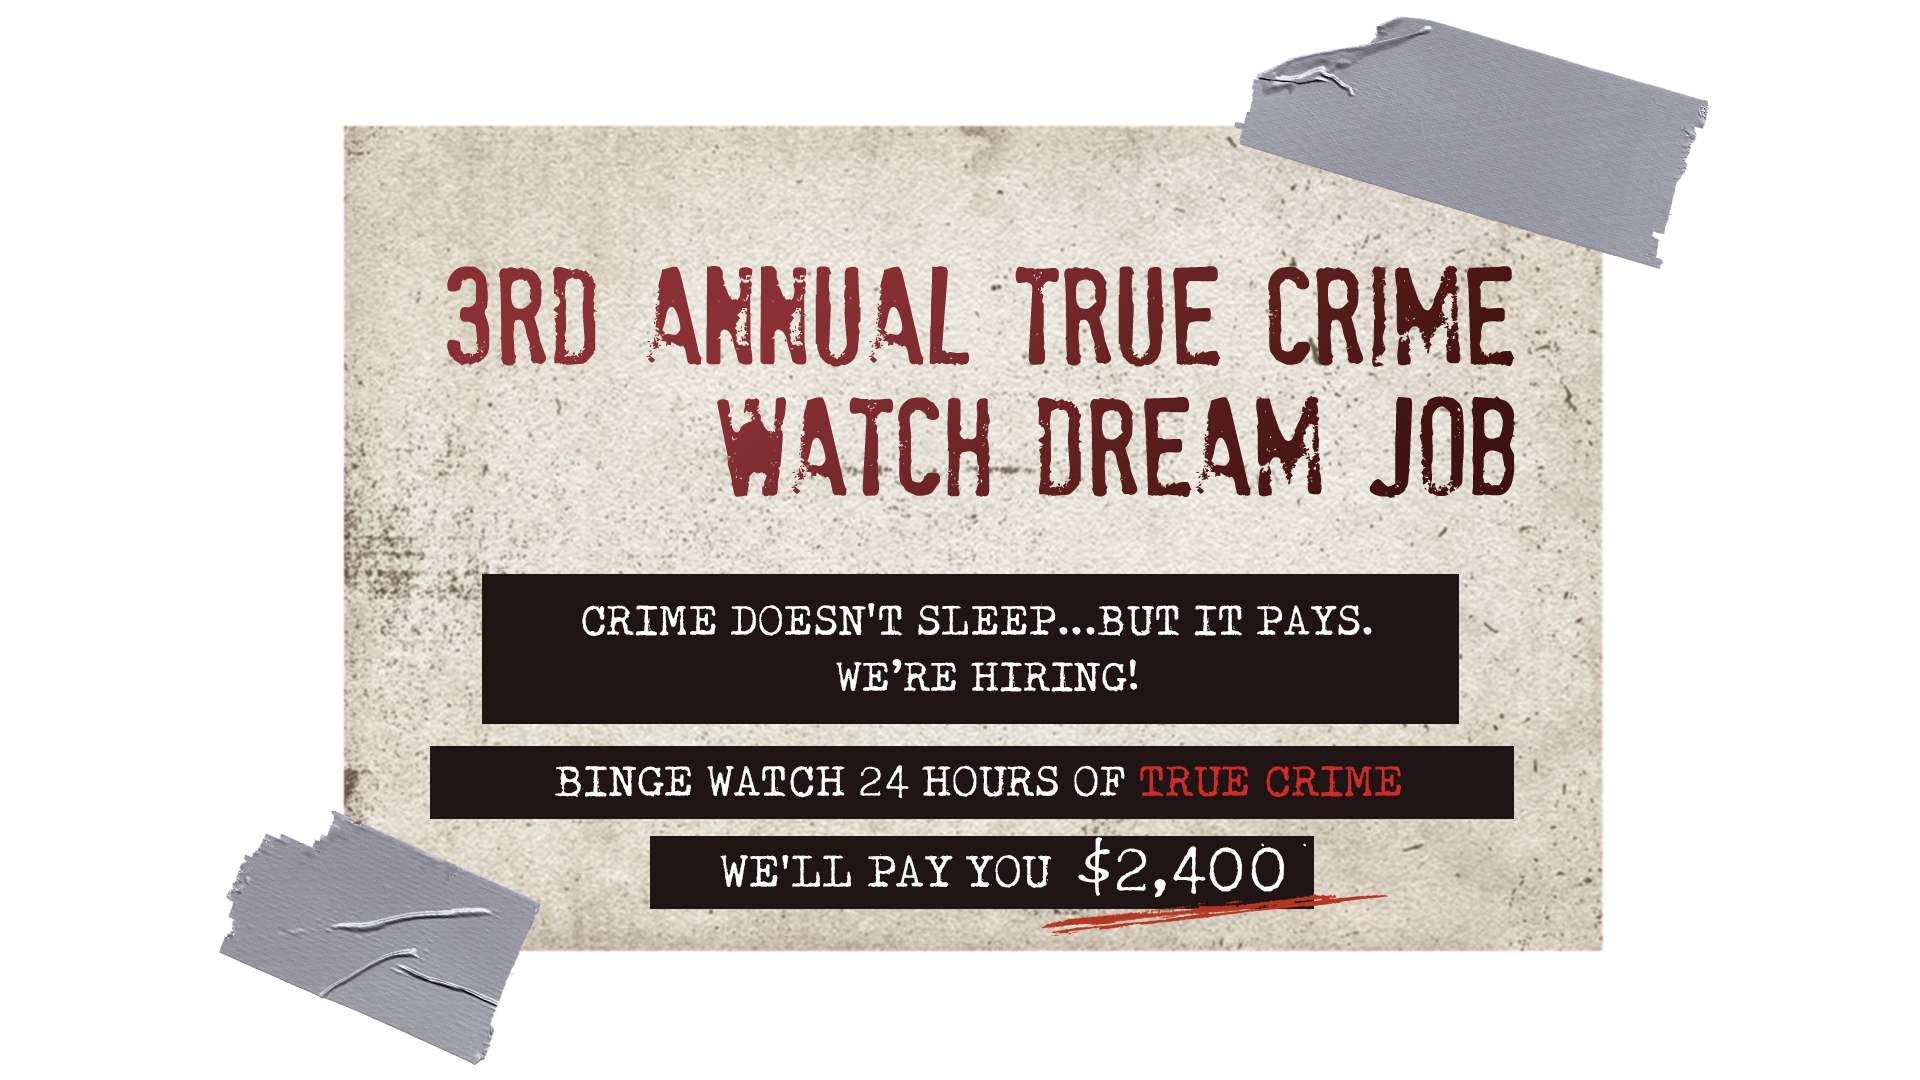 Crime doesn't sleep, but it pays. Can you survive 24 hours of true crime?. We will pay you $2400